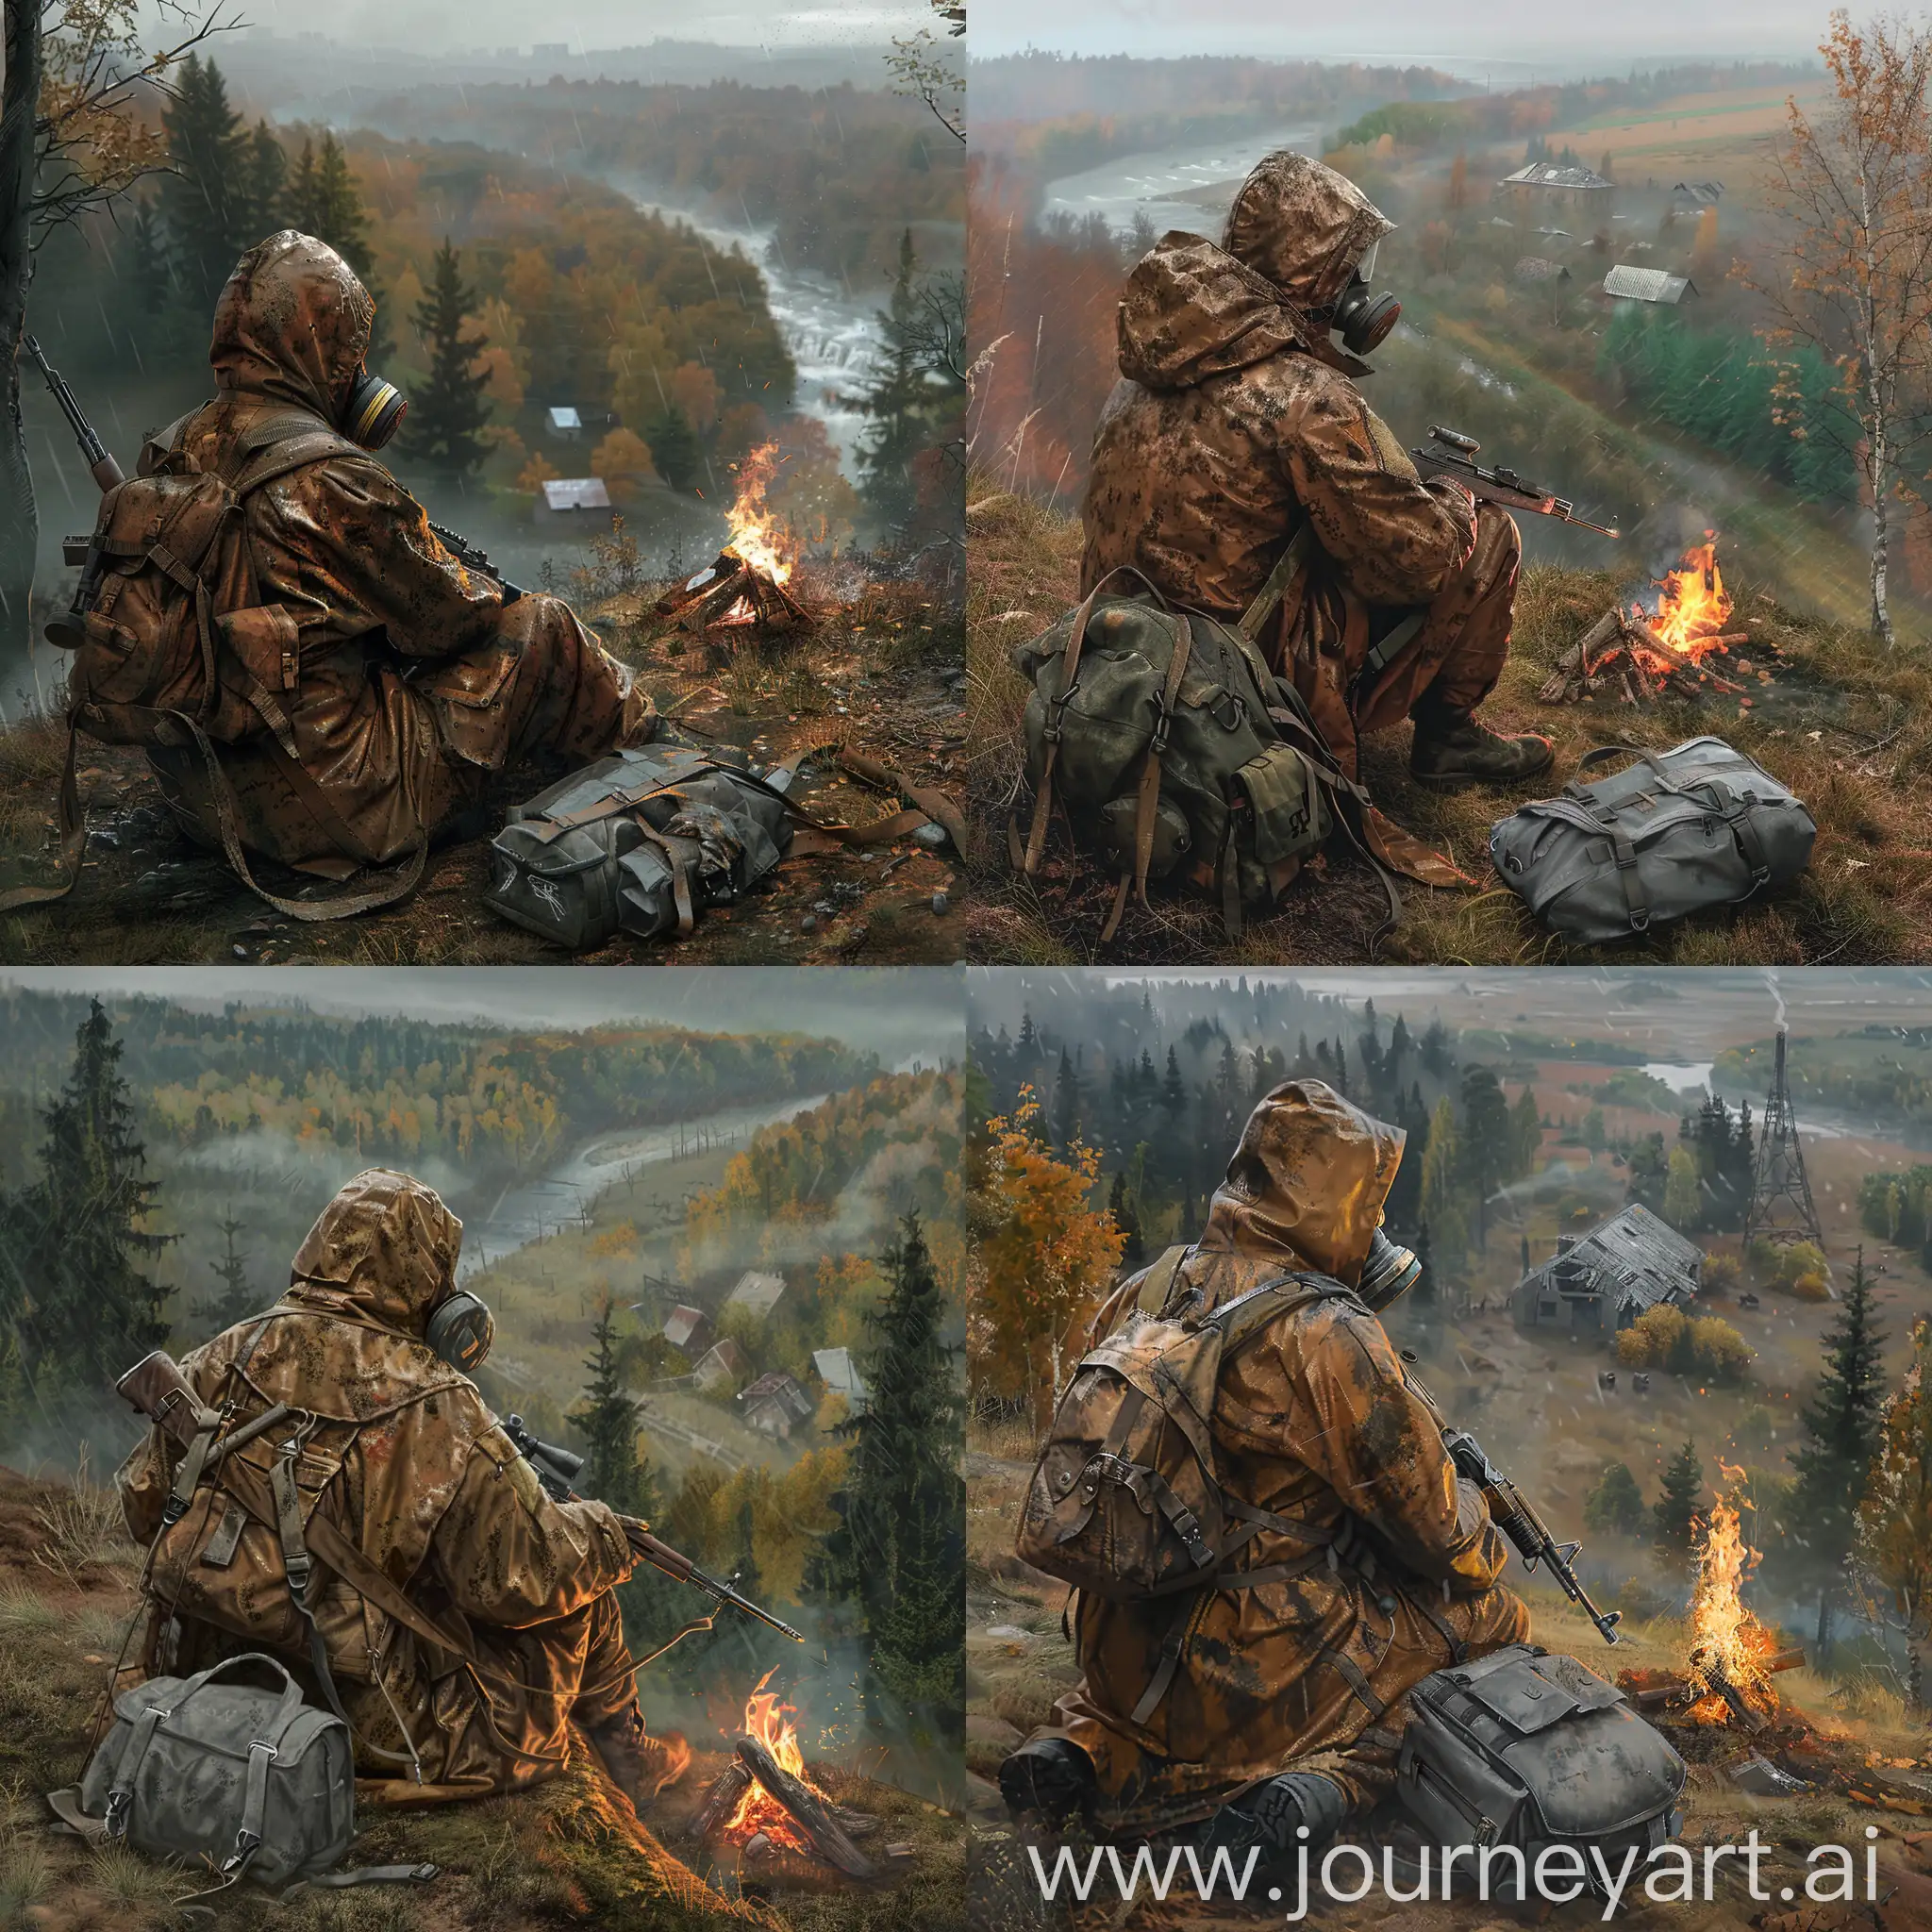 Stalker-Sitting-by-Campfire-in-Gloomy-Autumn-Forest